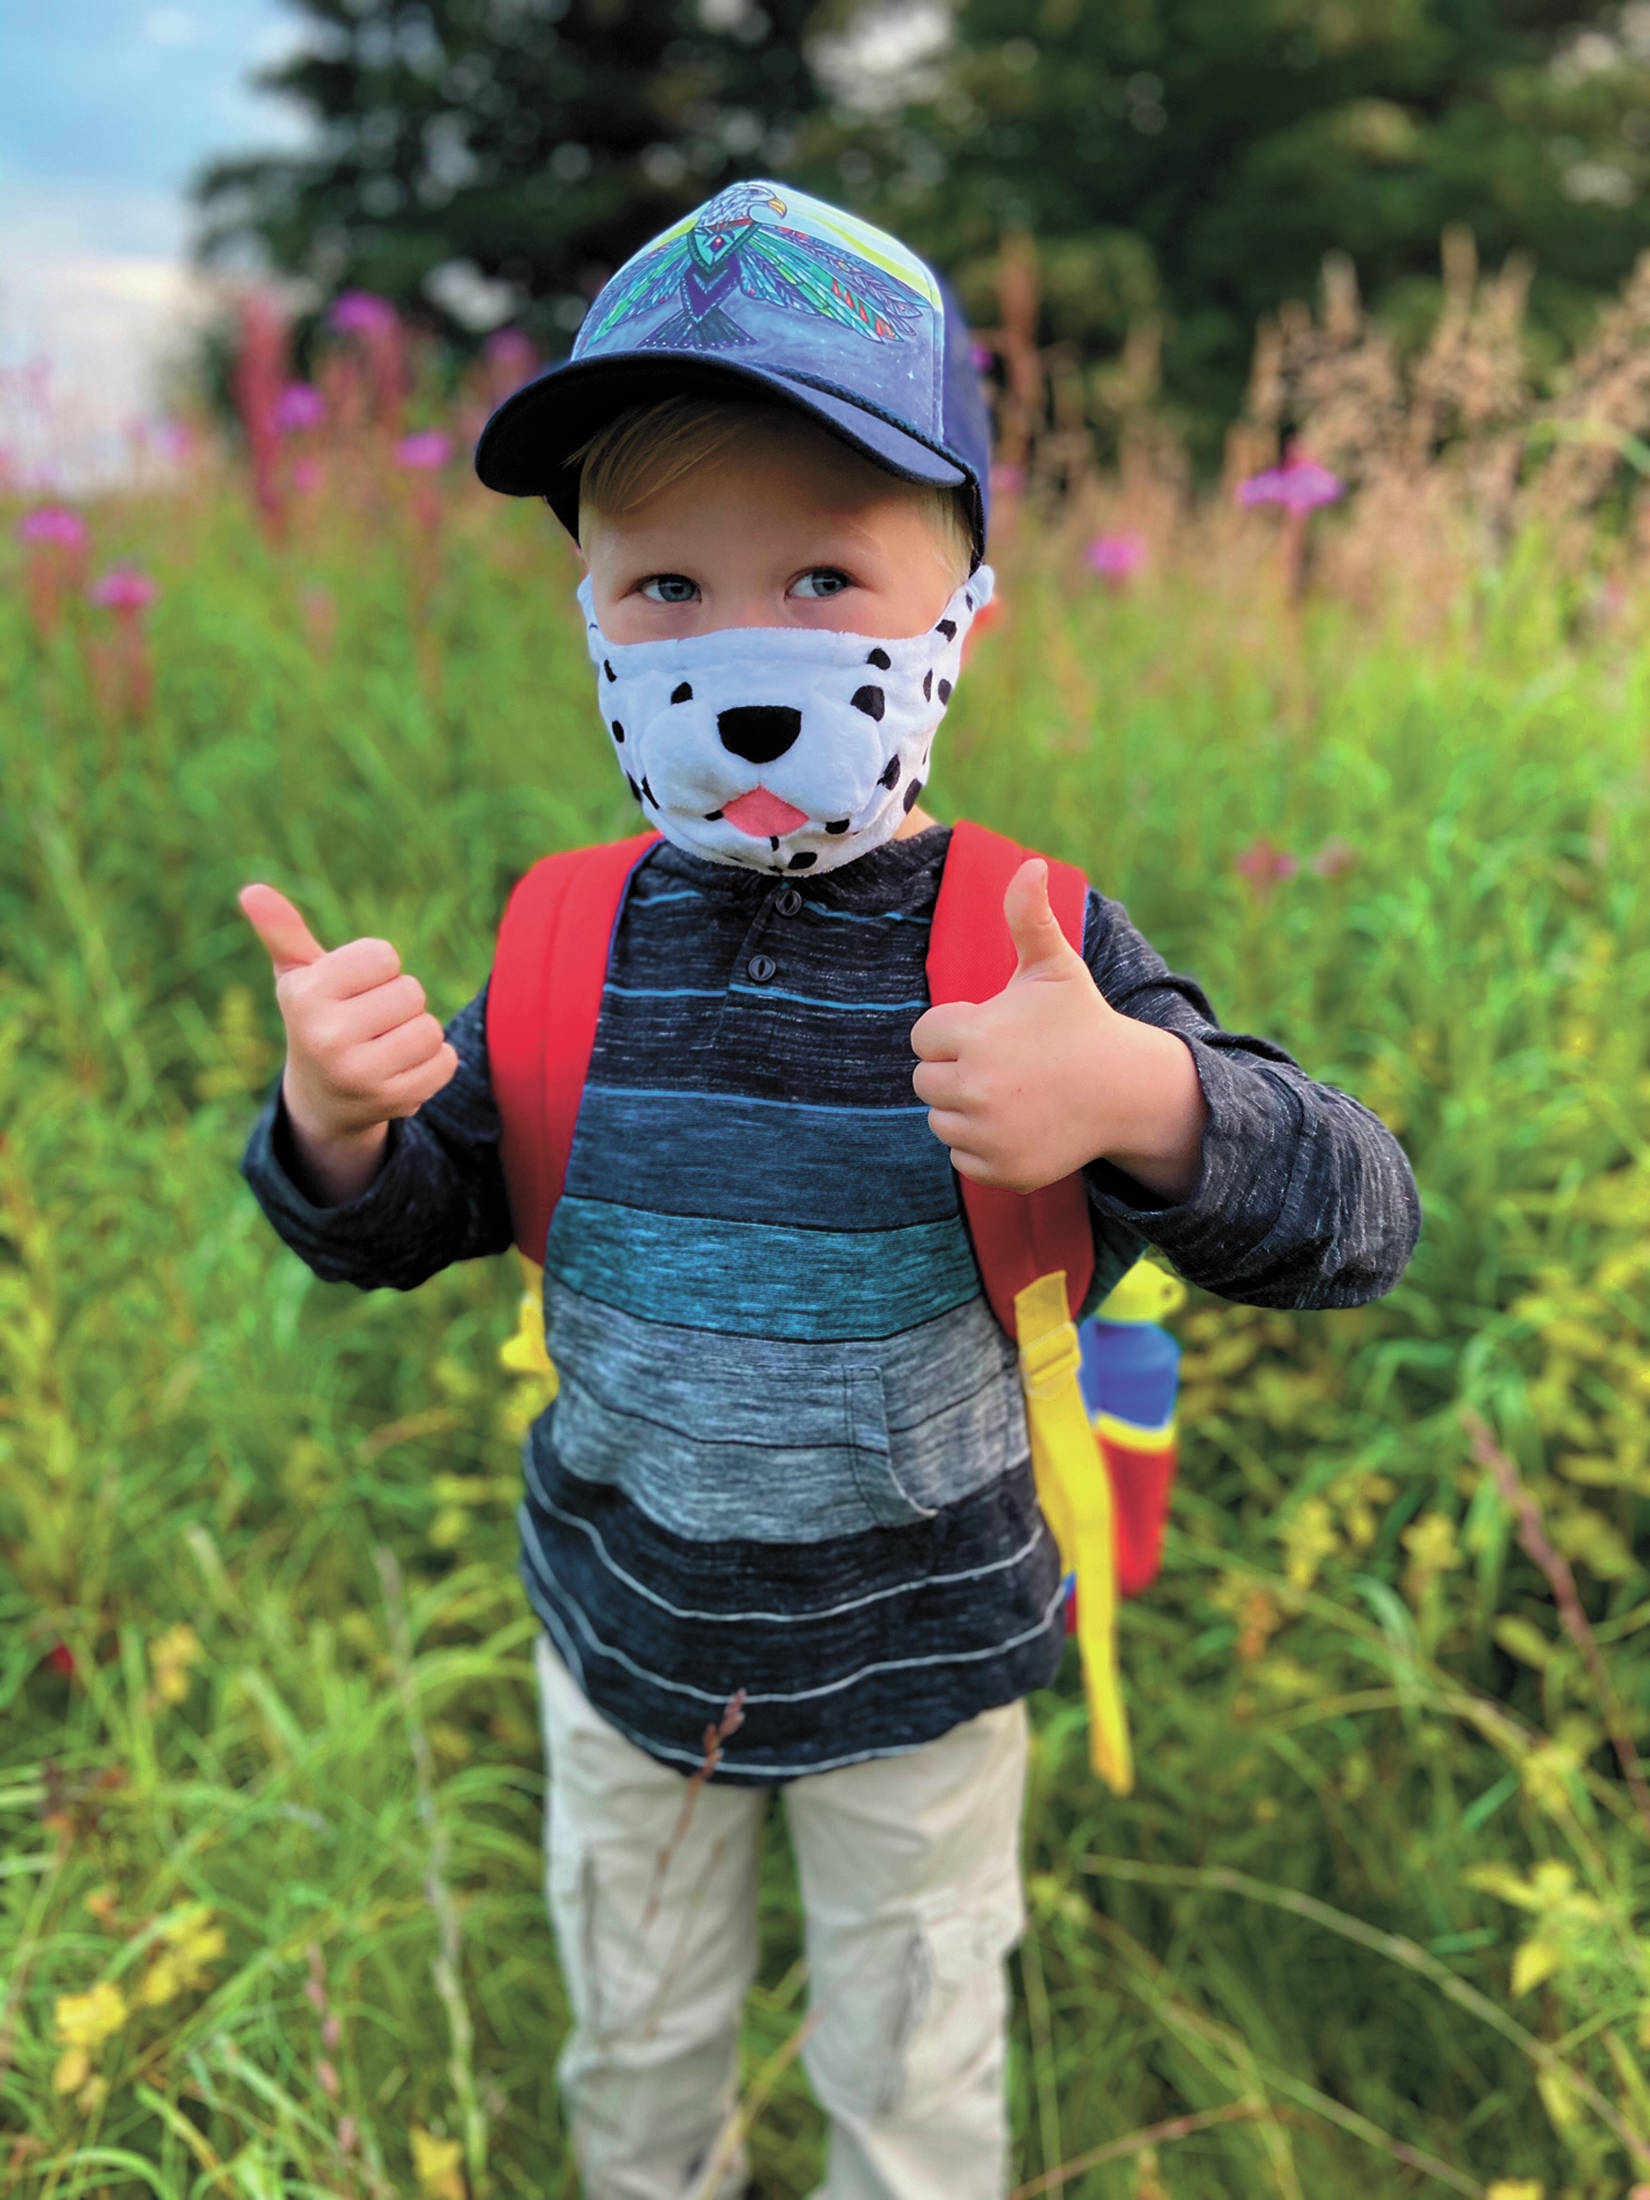 Austin Lake, a Kindergartener, shows off his mask for the first day of school at Little Fireweed Academy on Monday, Aug. 24, 2020 in Homer, Alaska. (Photo courtesy Janet Bowen, Fireweed Academy)